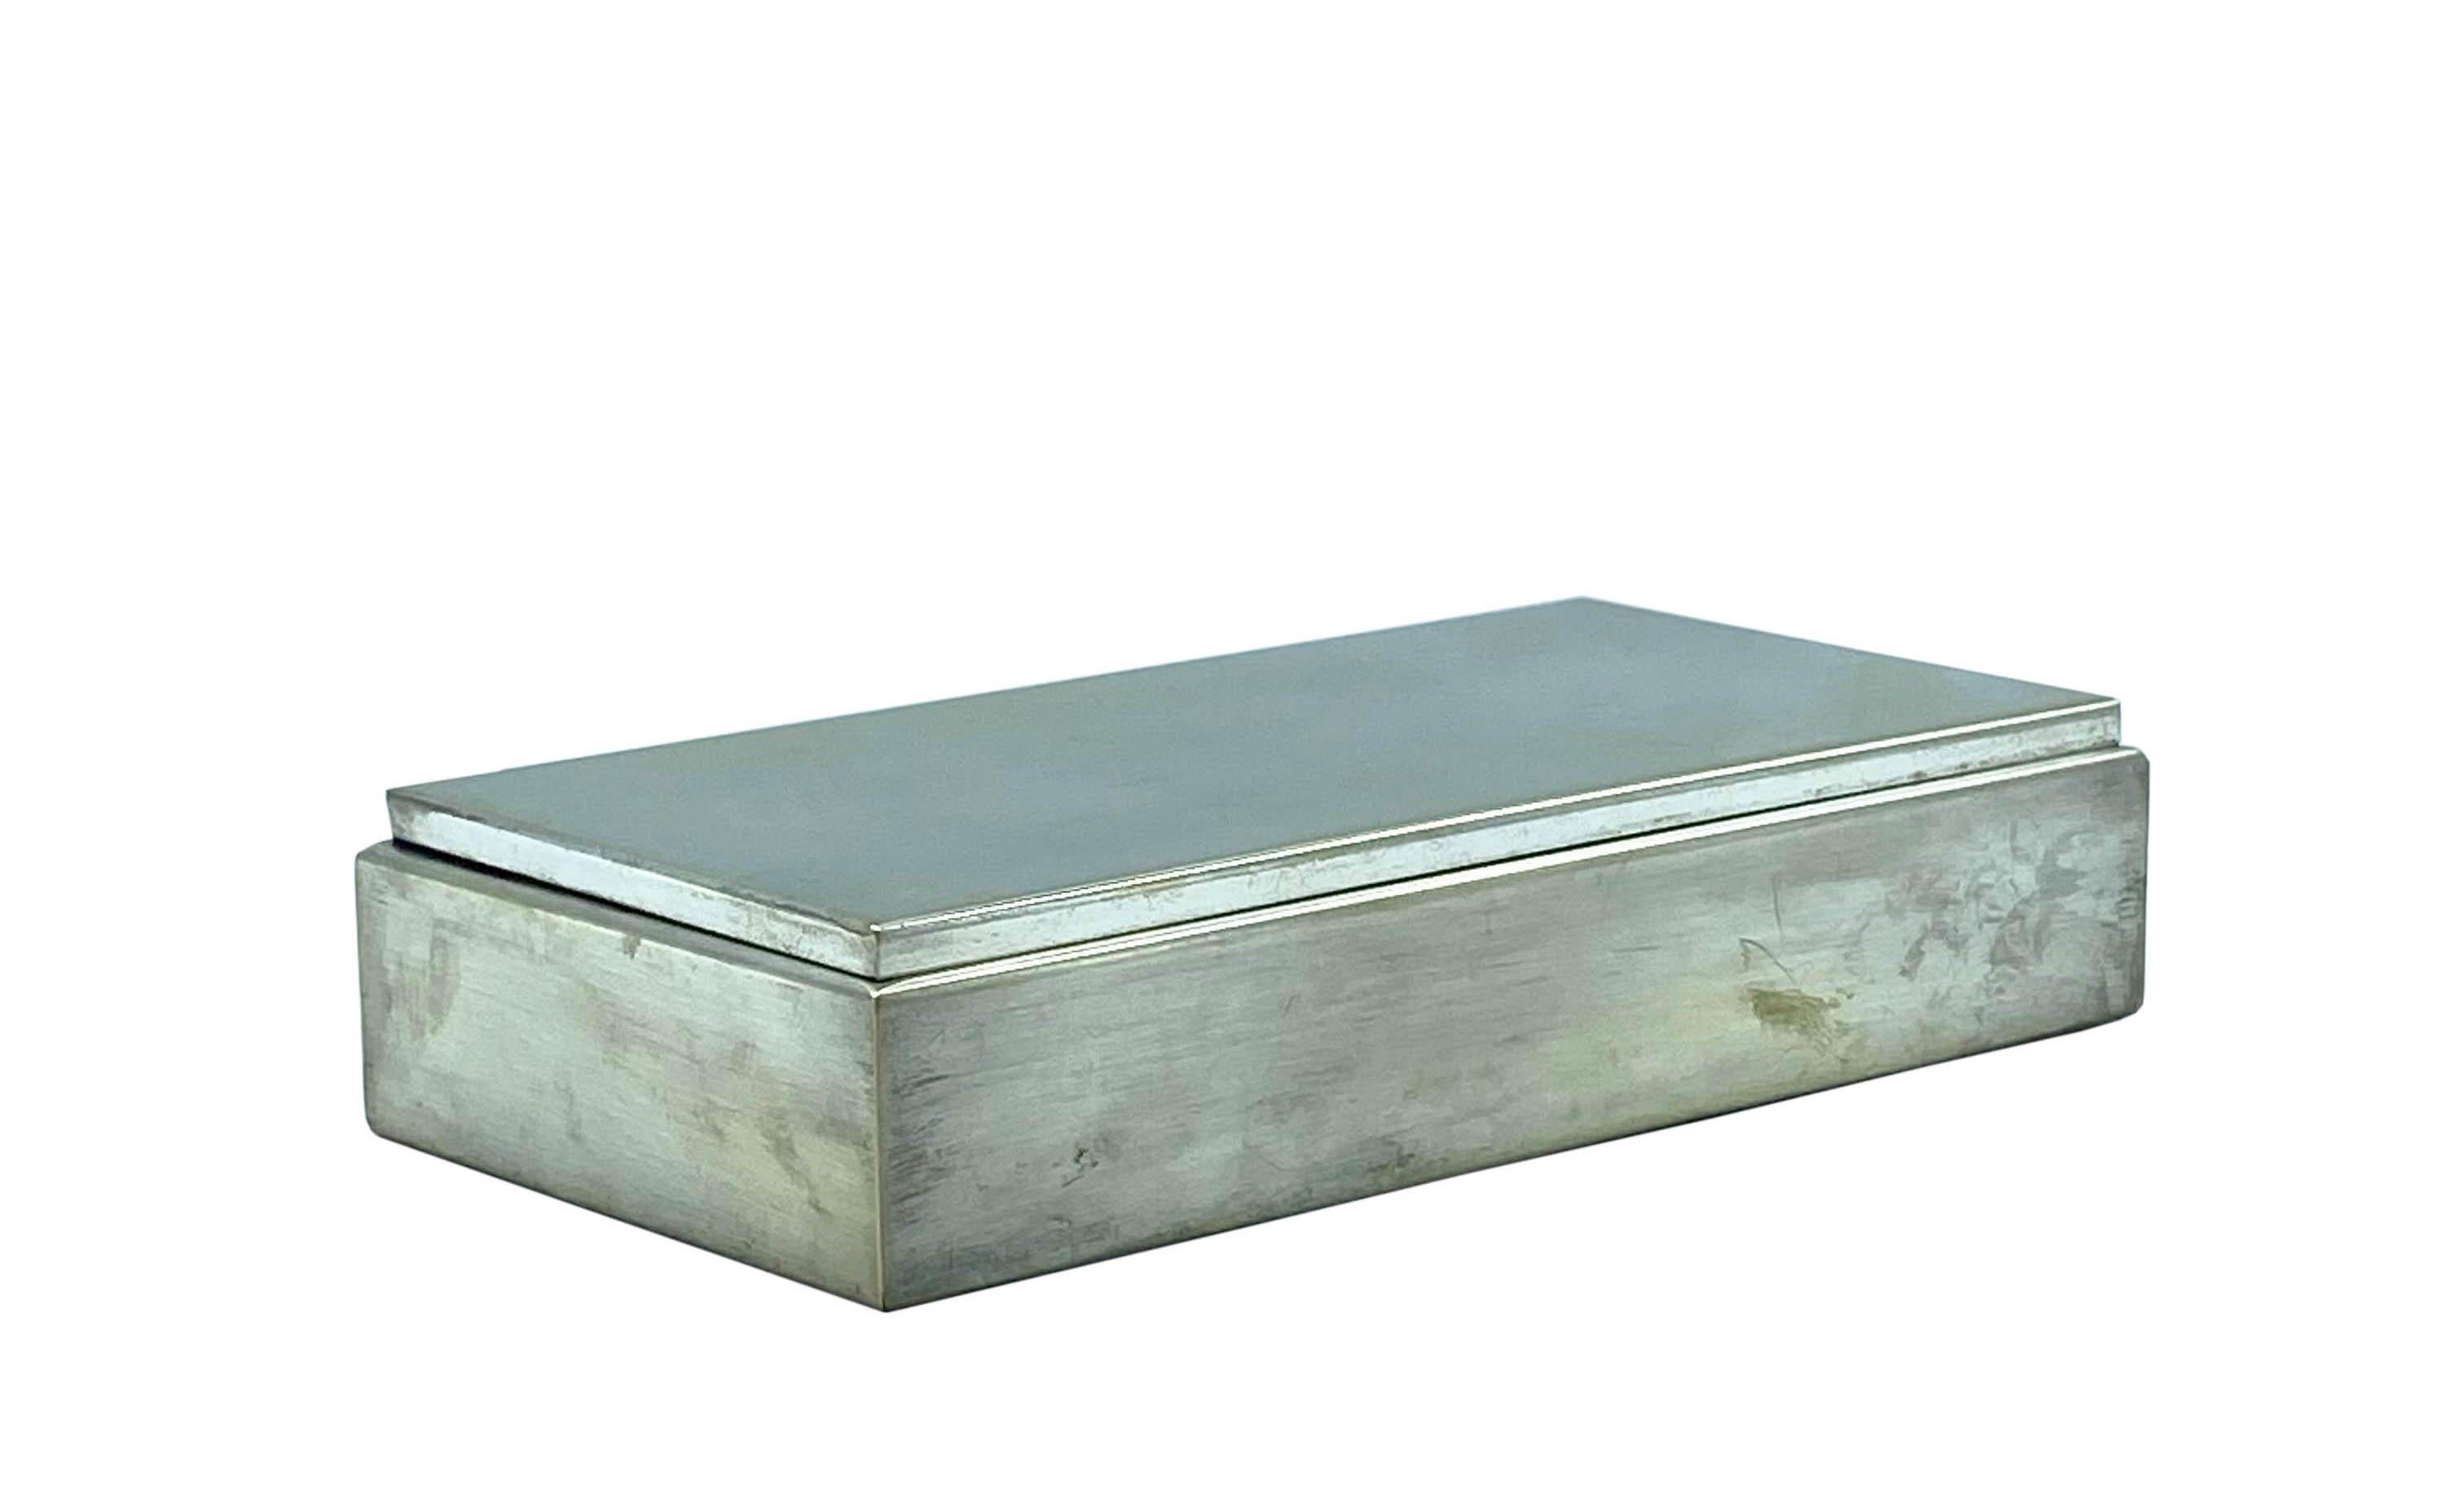 Silver-plated brass box and fabric-covered interior from 1970.